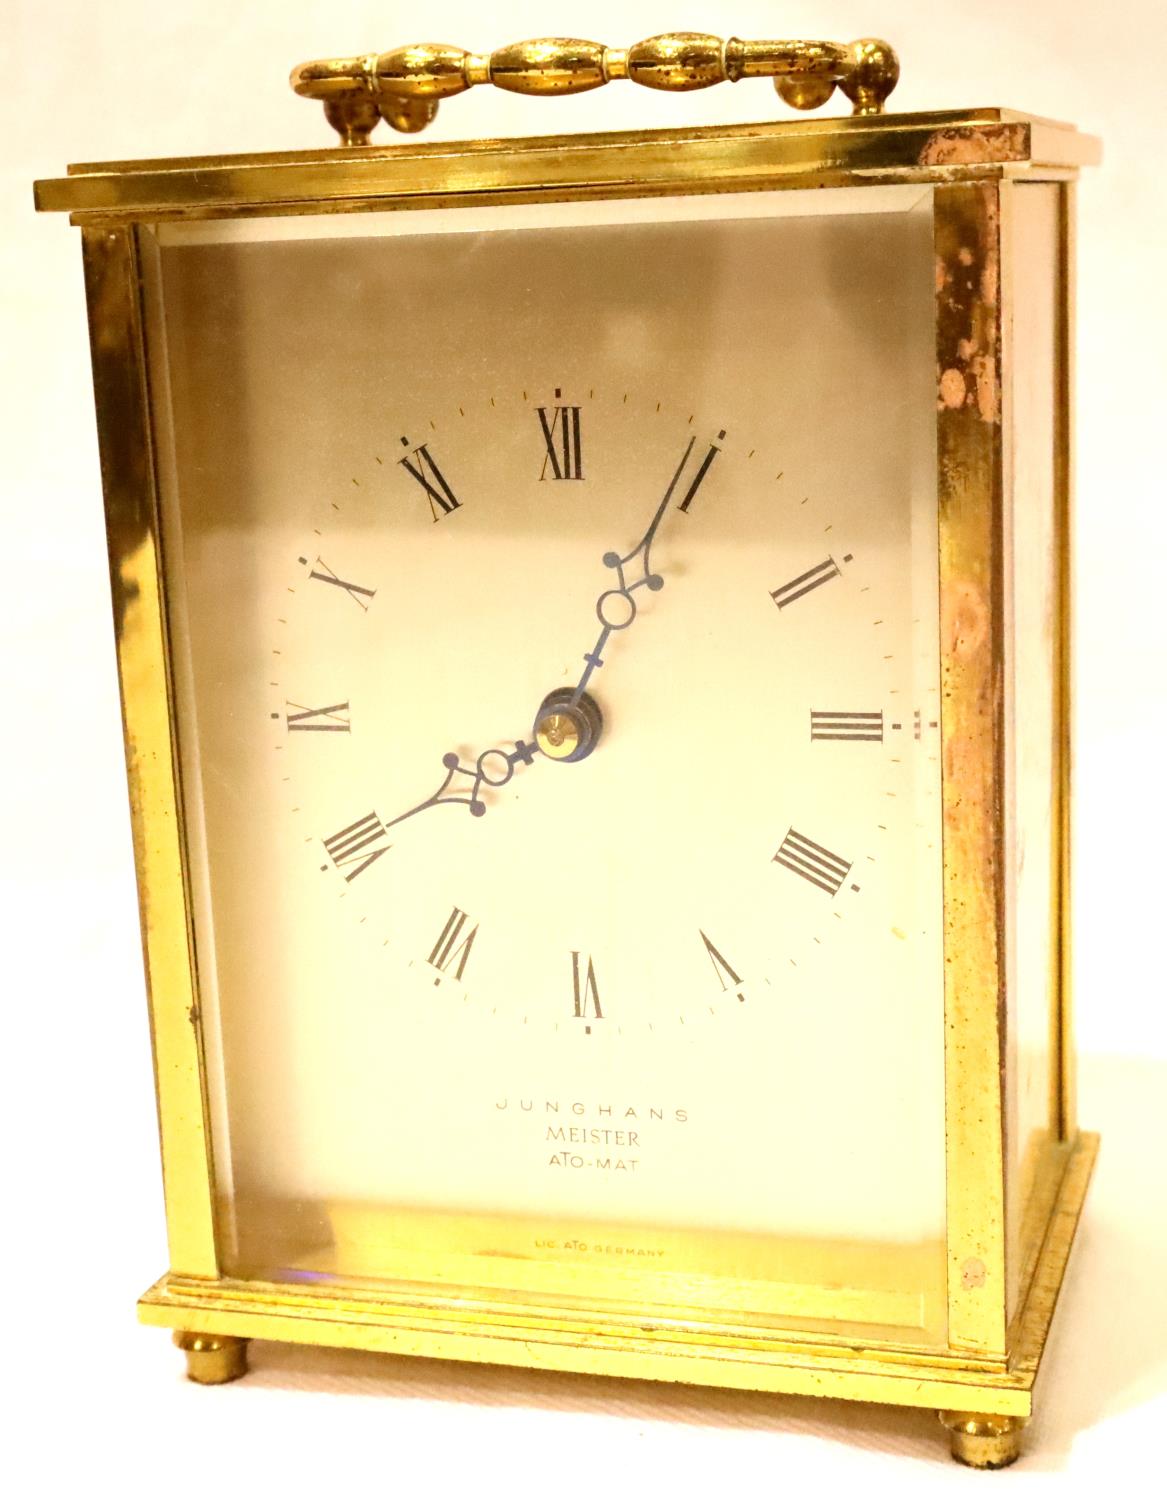 Junghans Meister Ato-mat brass battery powered carriage clock. P&P Group 2 (£18+VAT for the first